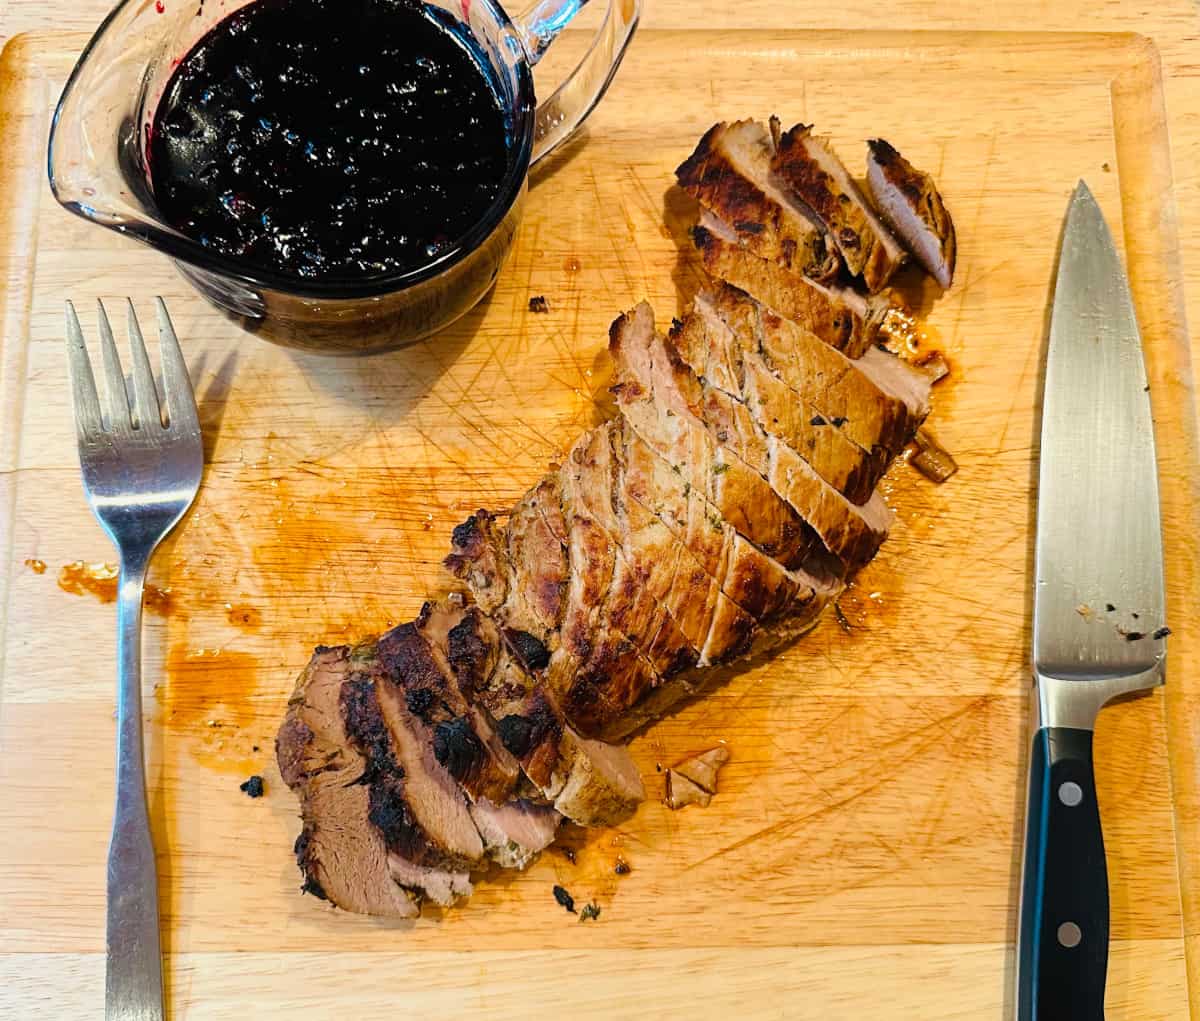 Blueberry sauce in a glass pitcher and sliced pork tenderloin between a fork and chef's knife on a wooden cutting board.